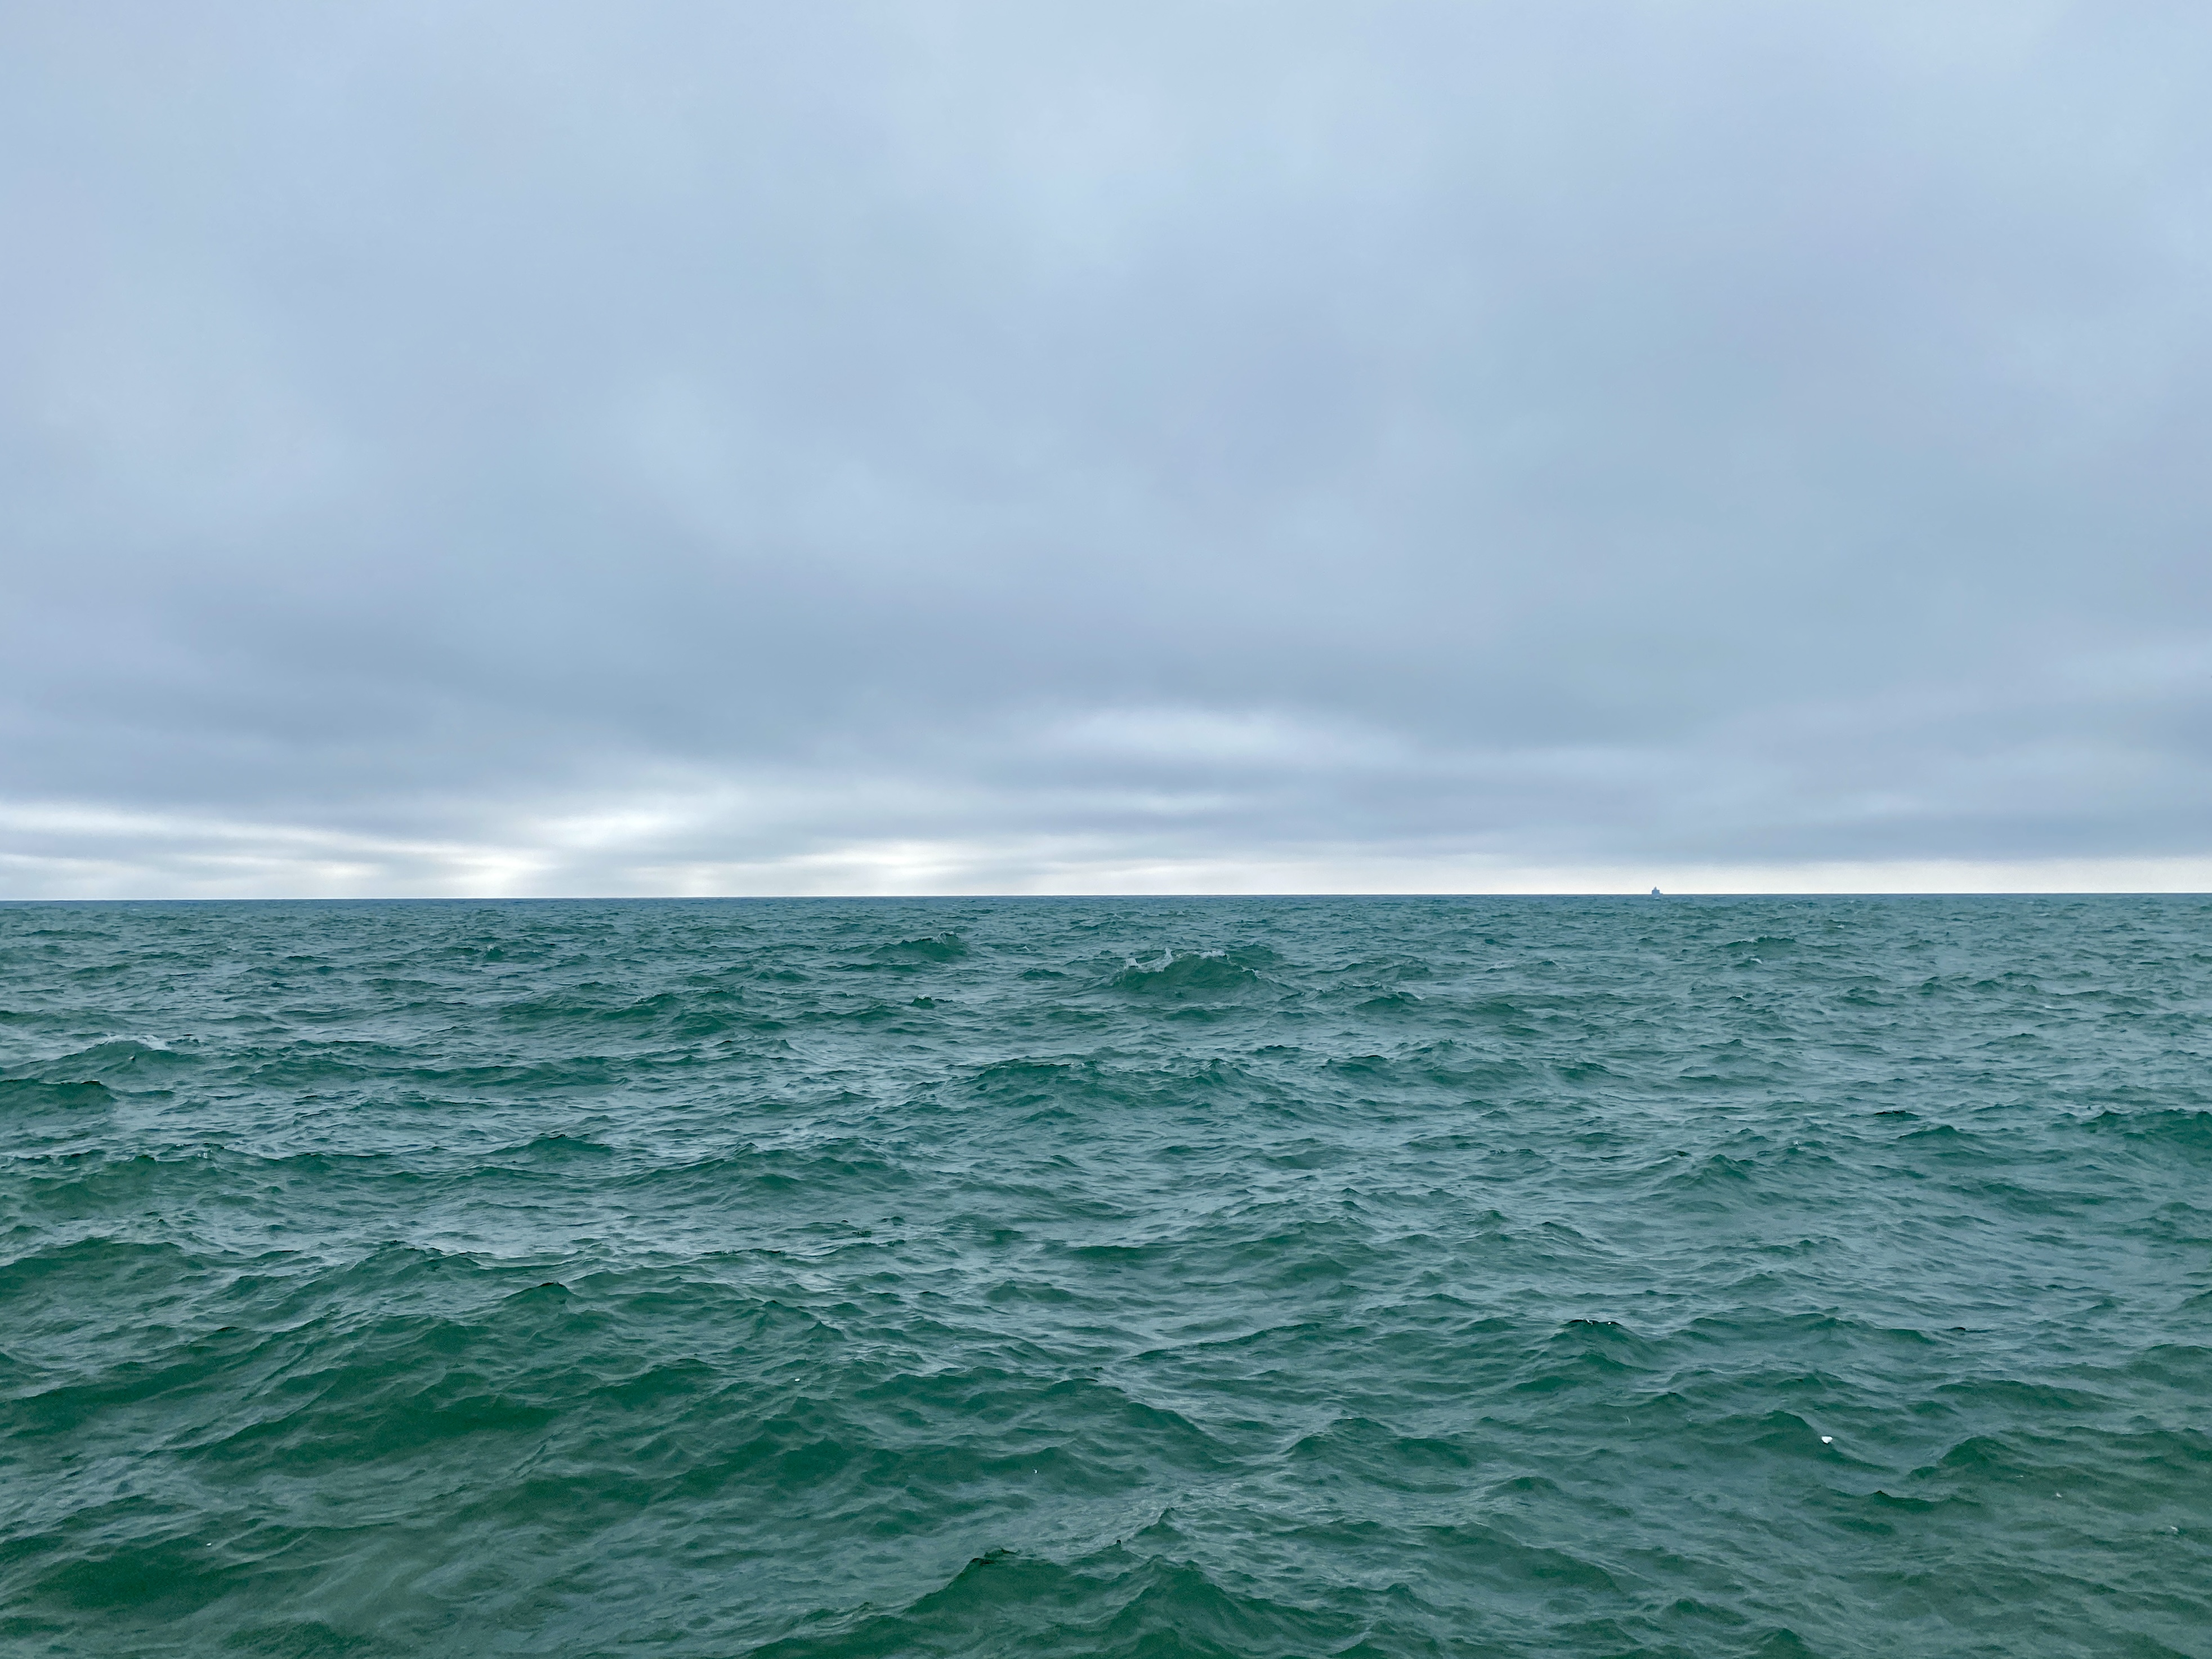 A large lake under a grey clouded sky, the water surface choppy and shaded dark turquoise